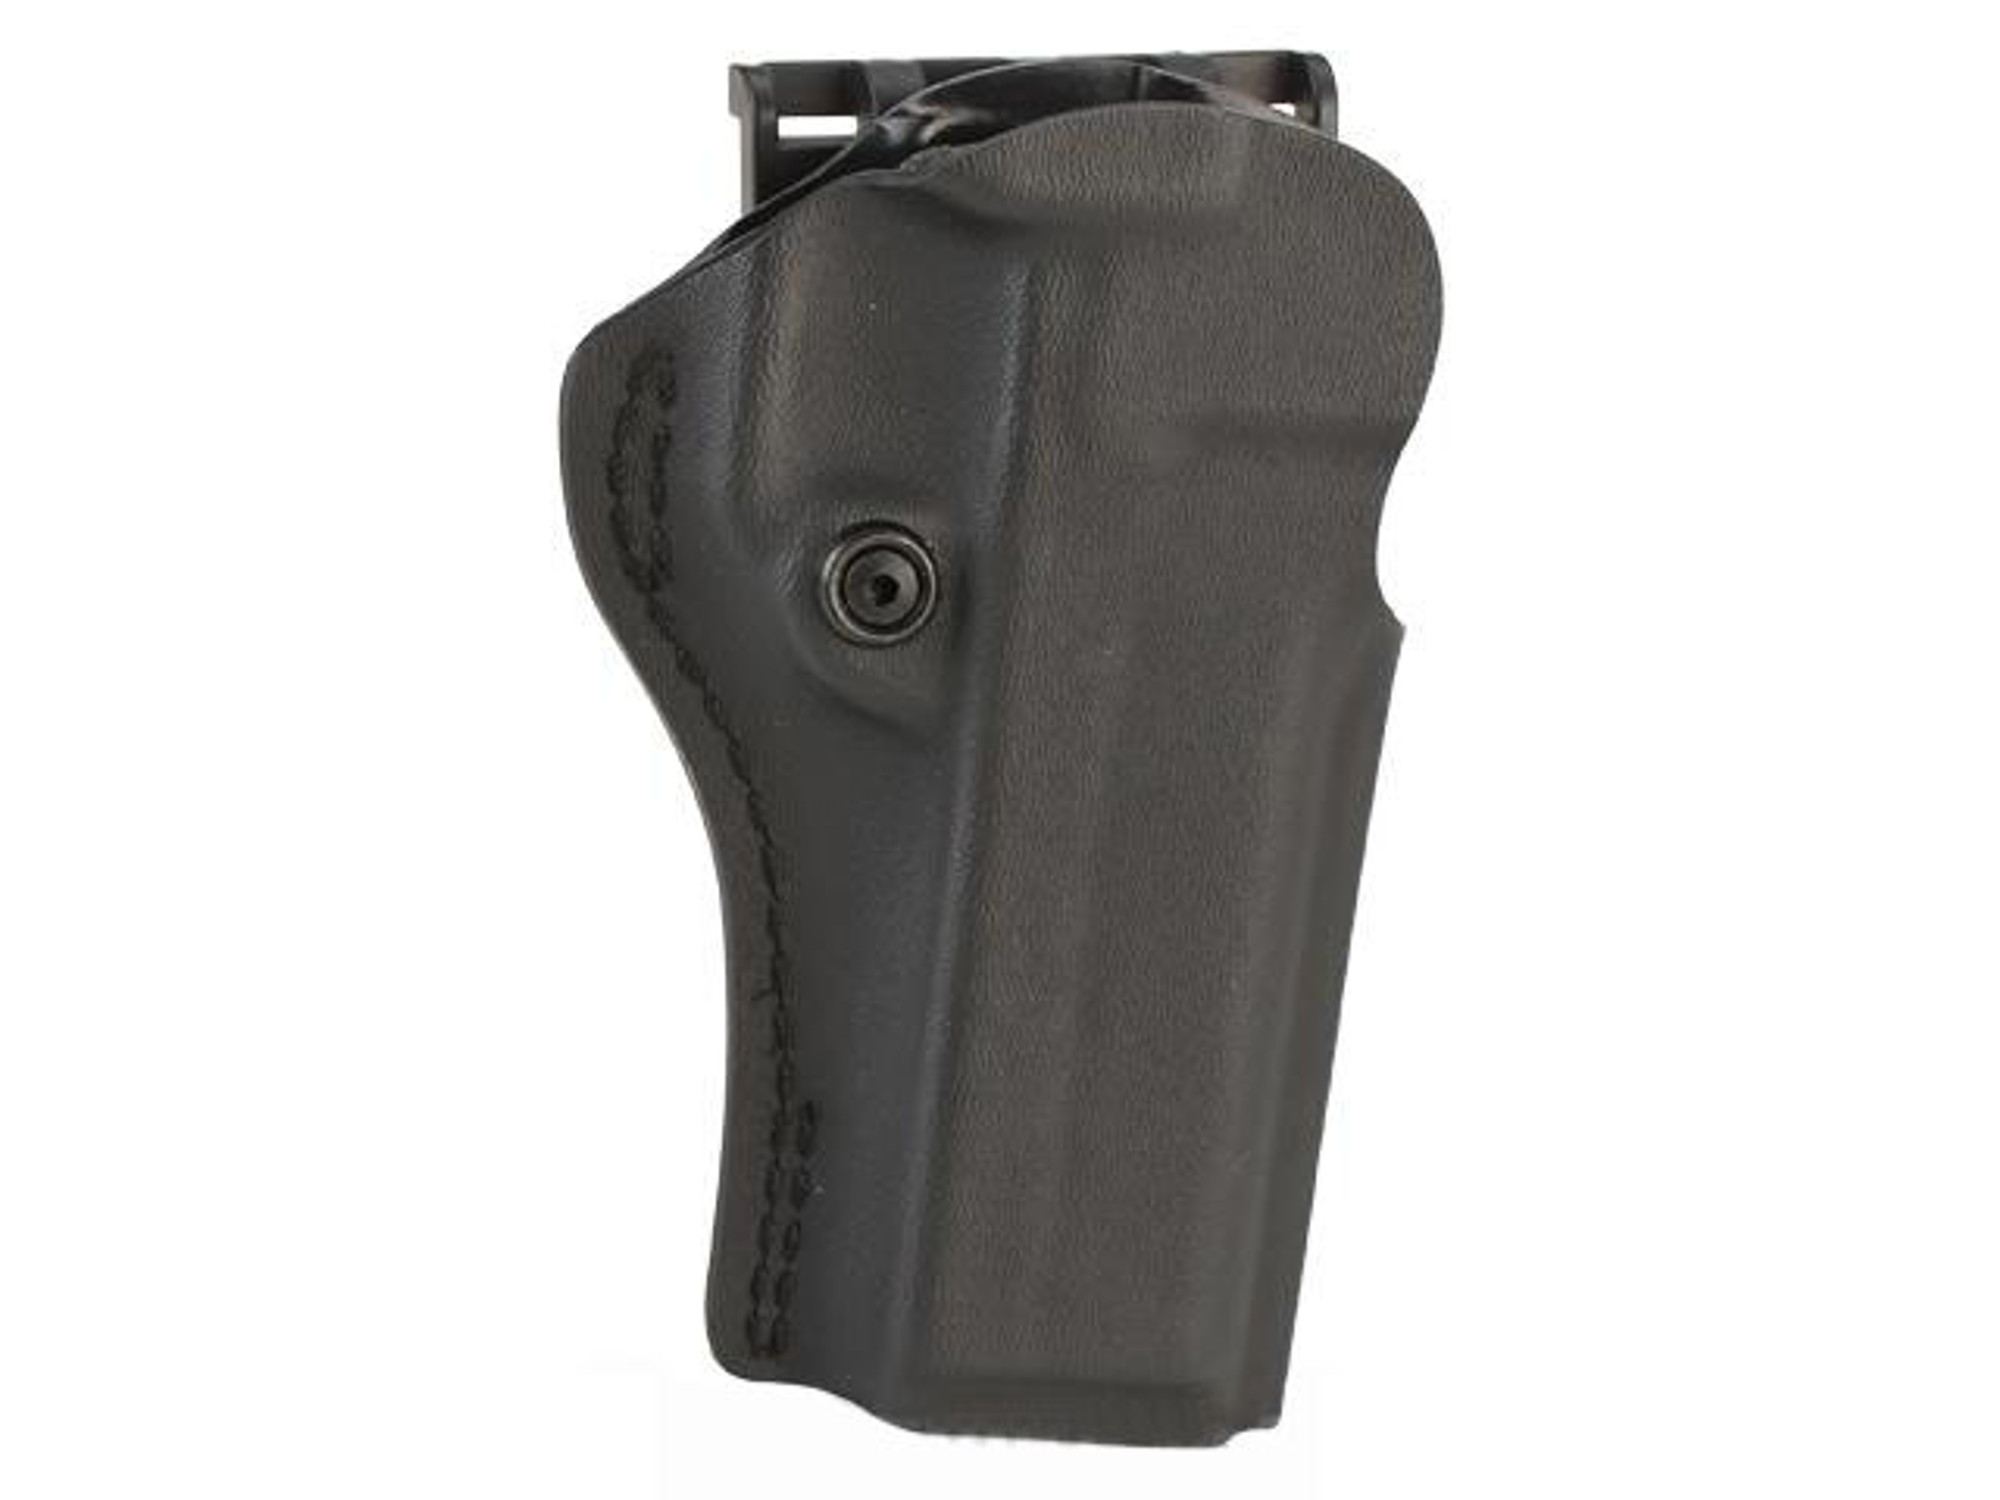 SAFARILAND Open Top Concealment MS19 Clip Holster with Detent - STI 2011 5" w/ Full Dust Cover (Right)